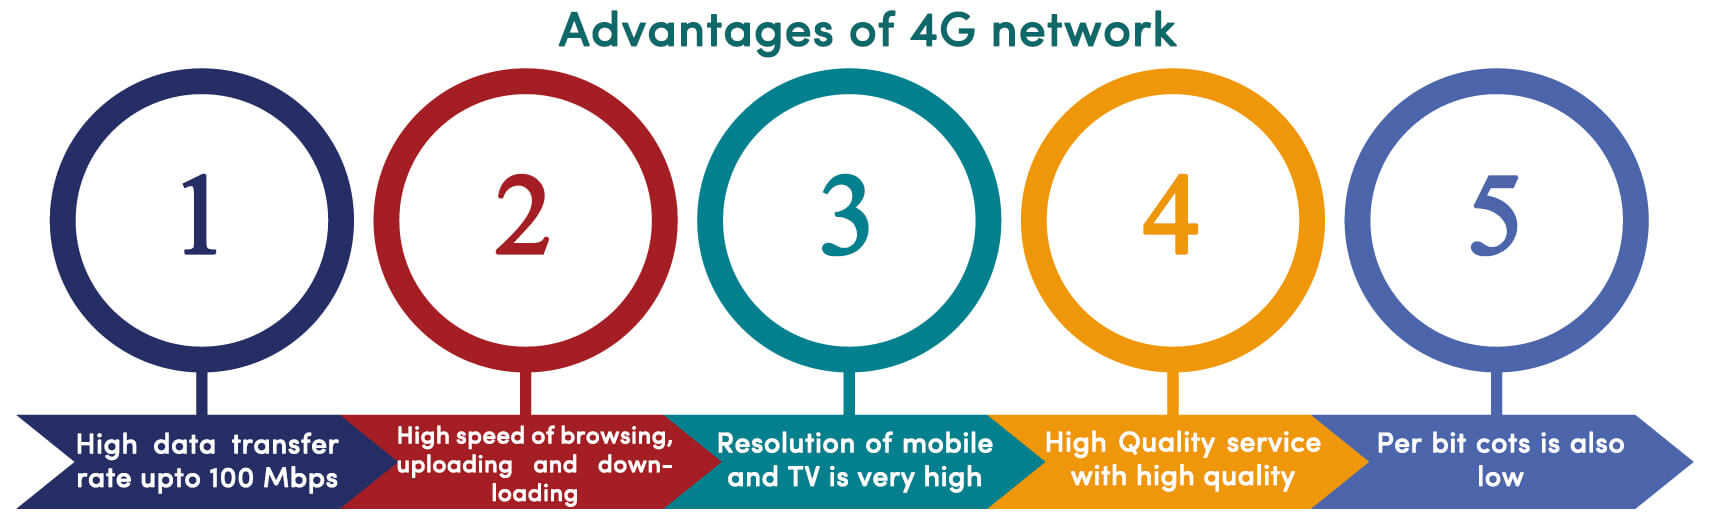 4g features and challenges